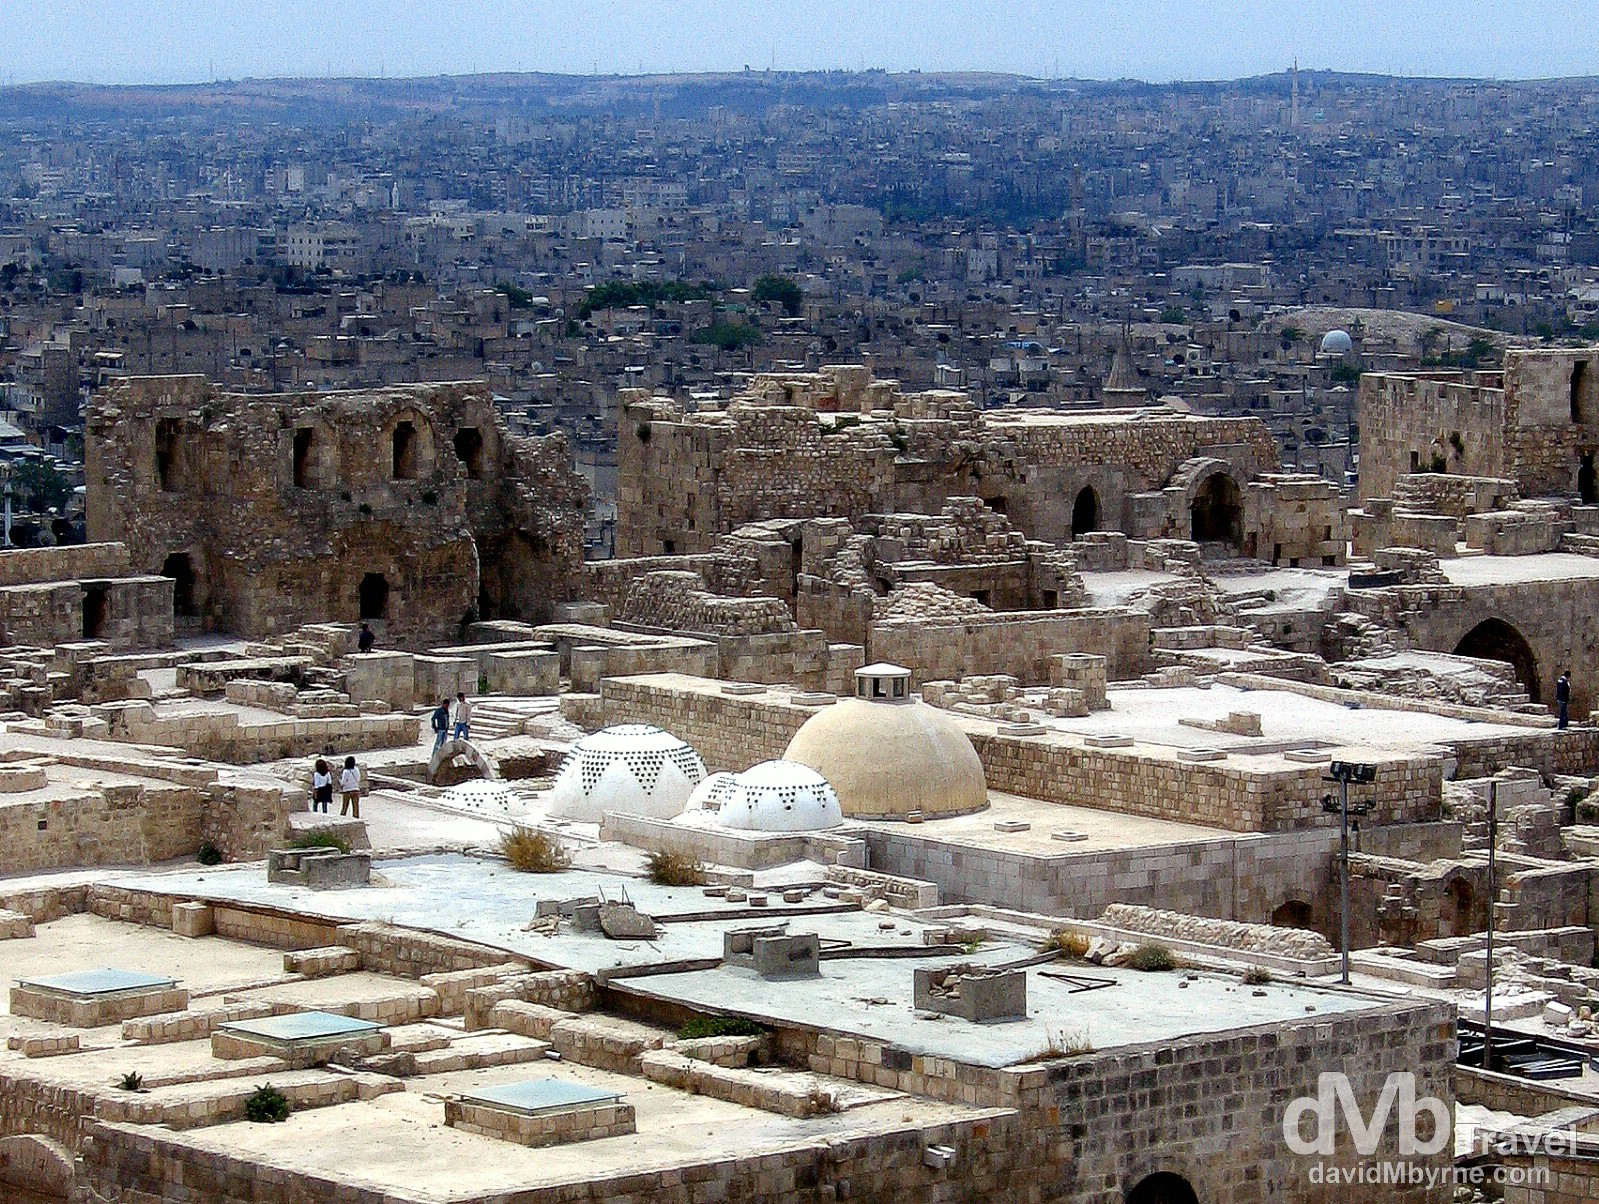 A section of the fort in Aleppo, Syria. May 9, 2008.